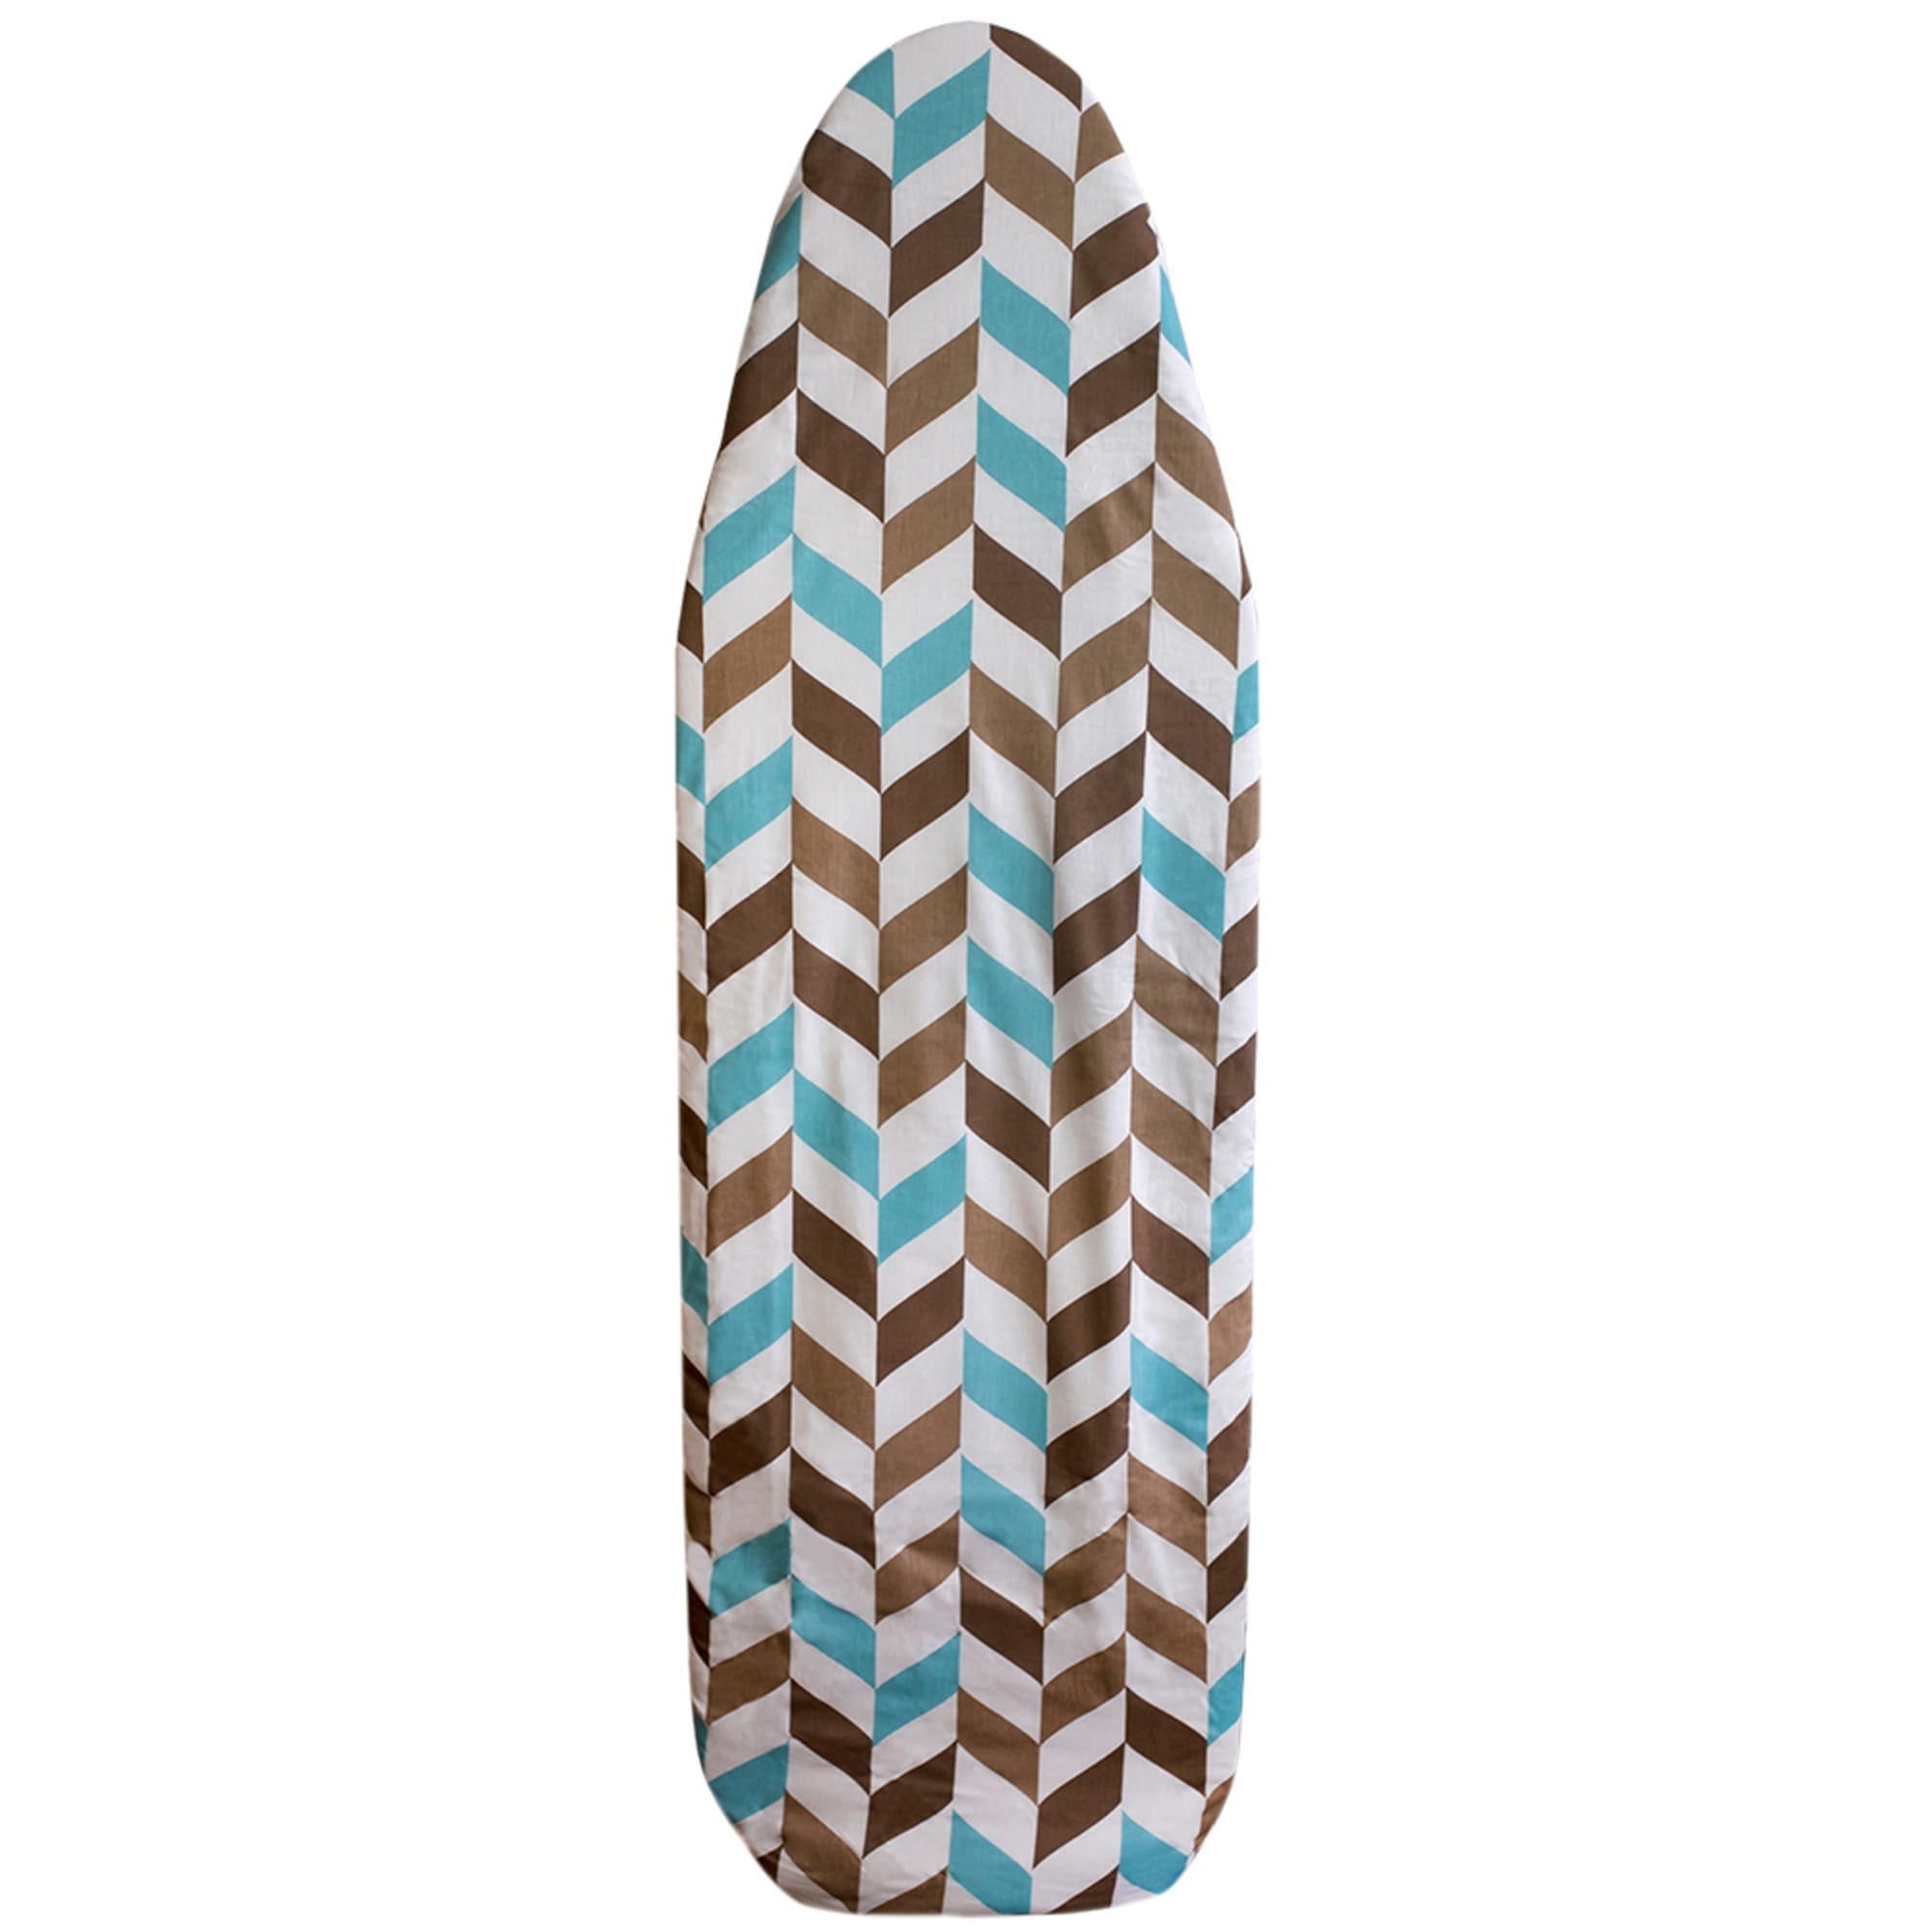 Home Basics Chevron Cotton Ironing Board Cover, Multi-Color $8.00 EACH, CASE PACK OF 12